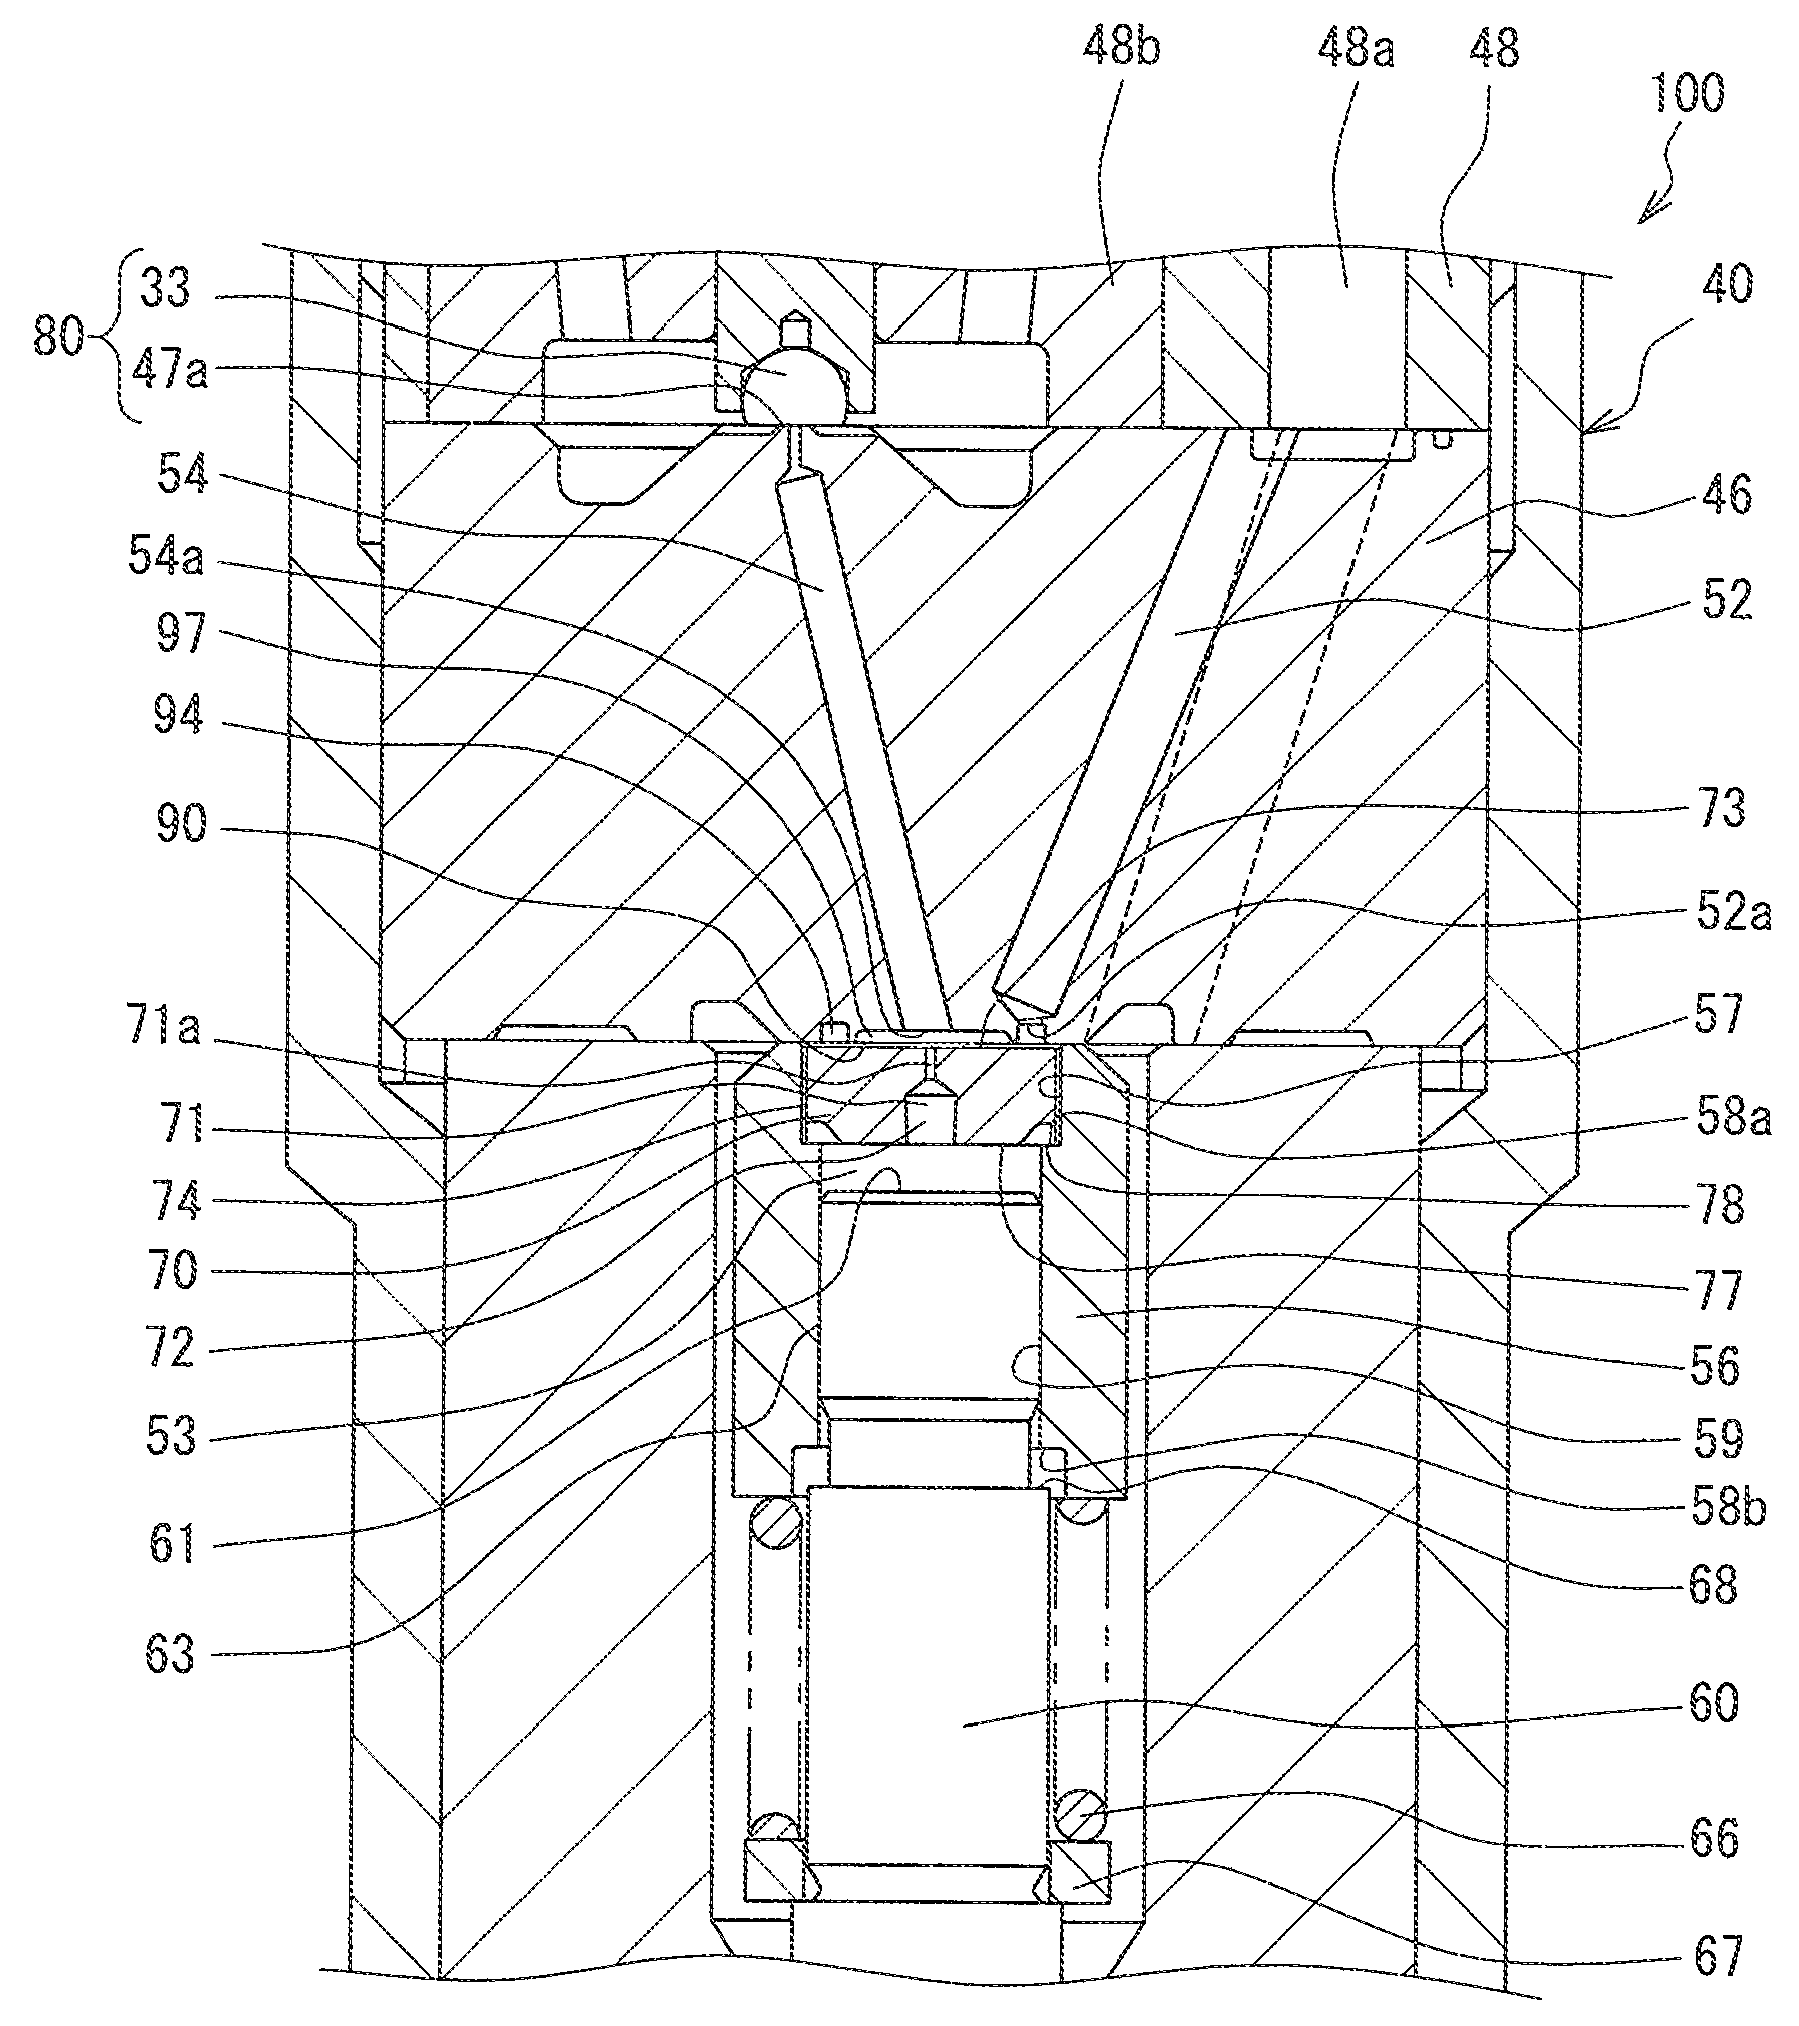 Fuel injection device